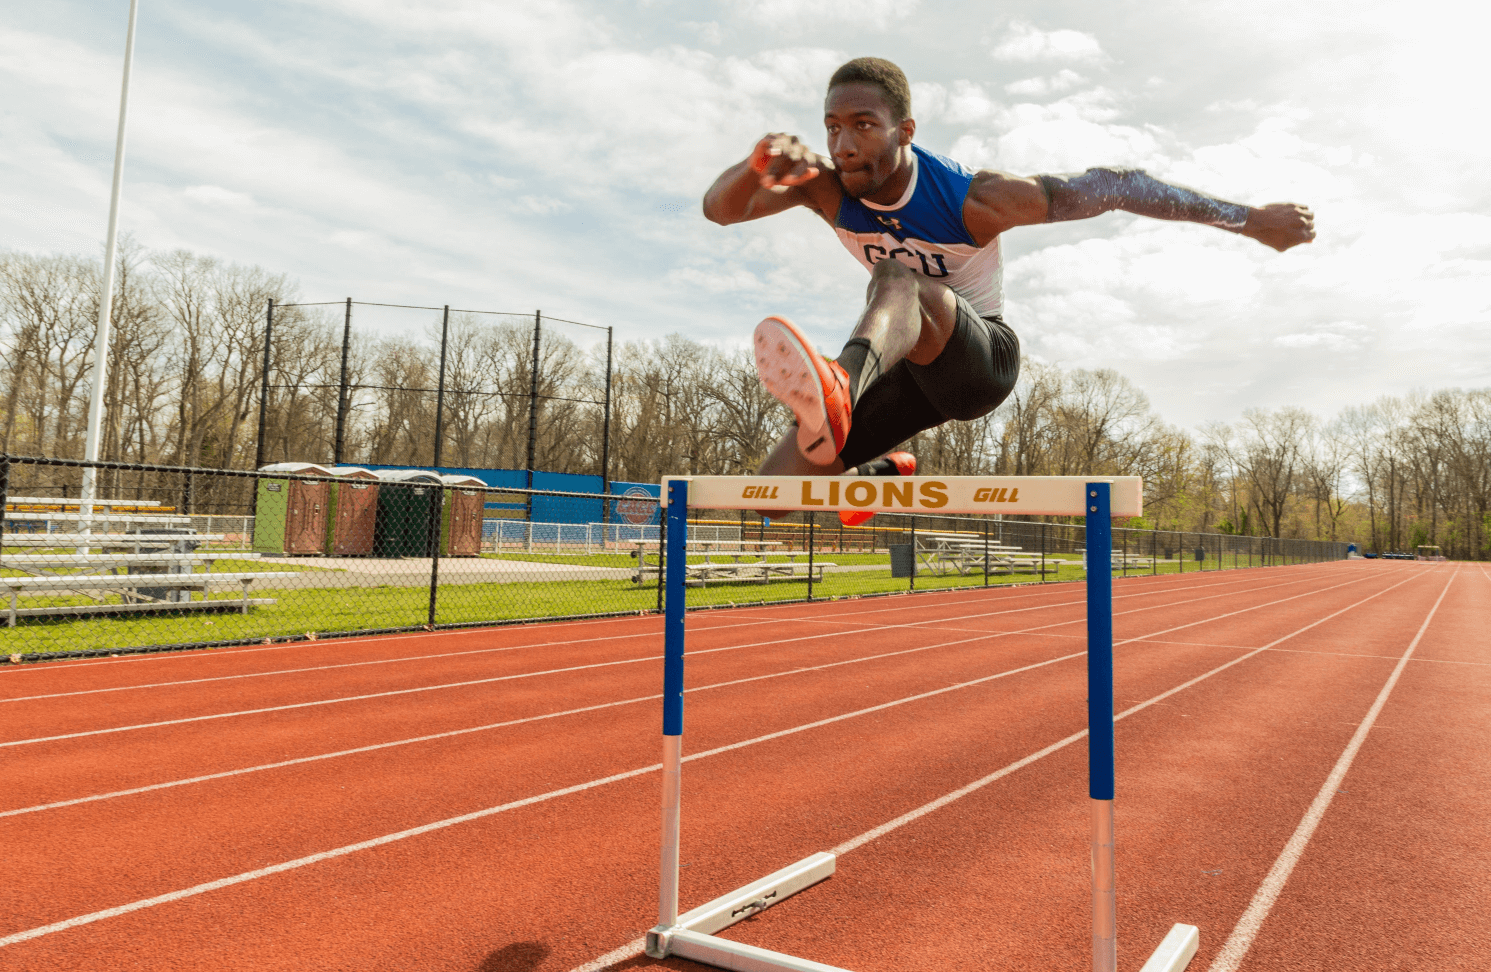 Student athlete jumping hurdle on running track